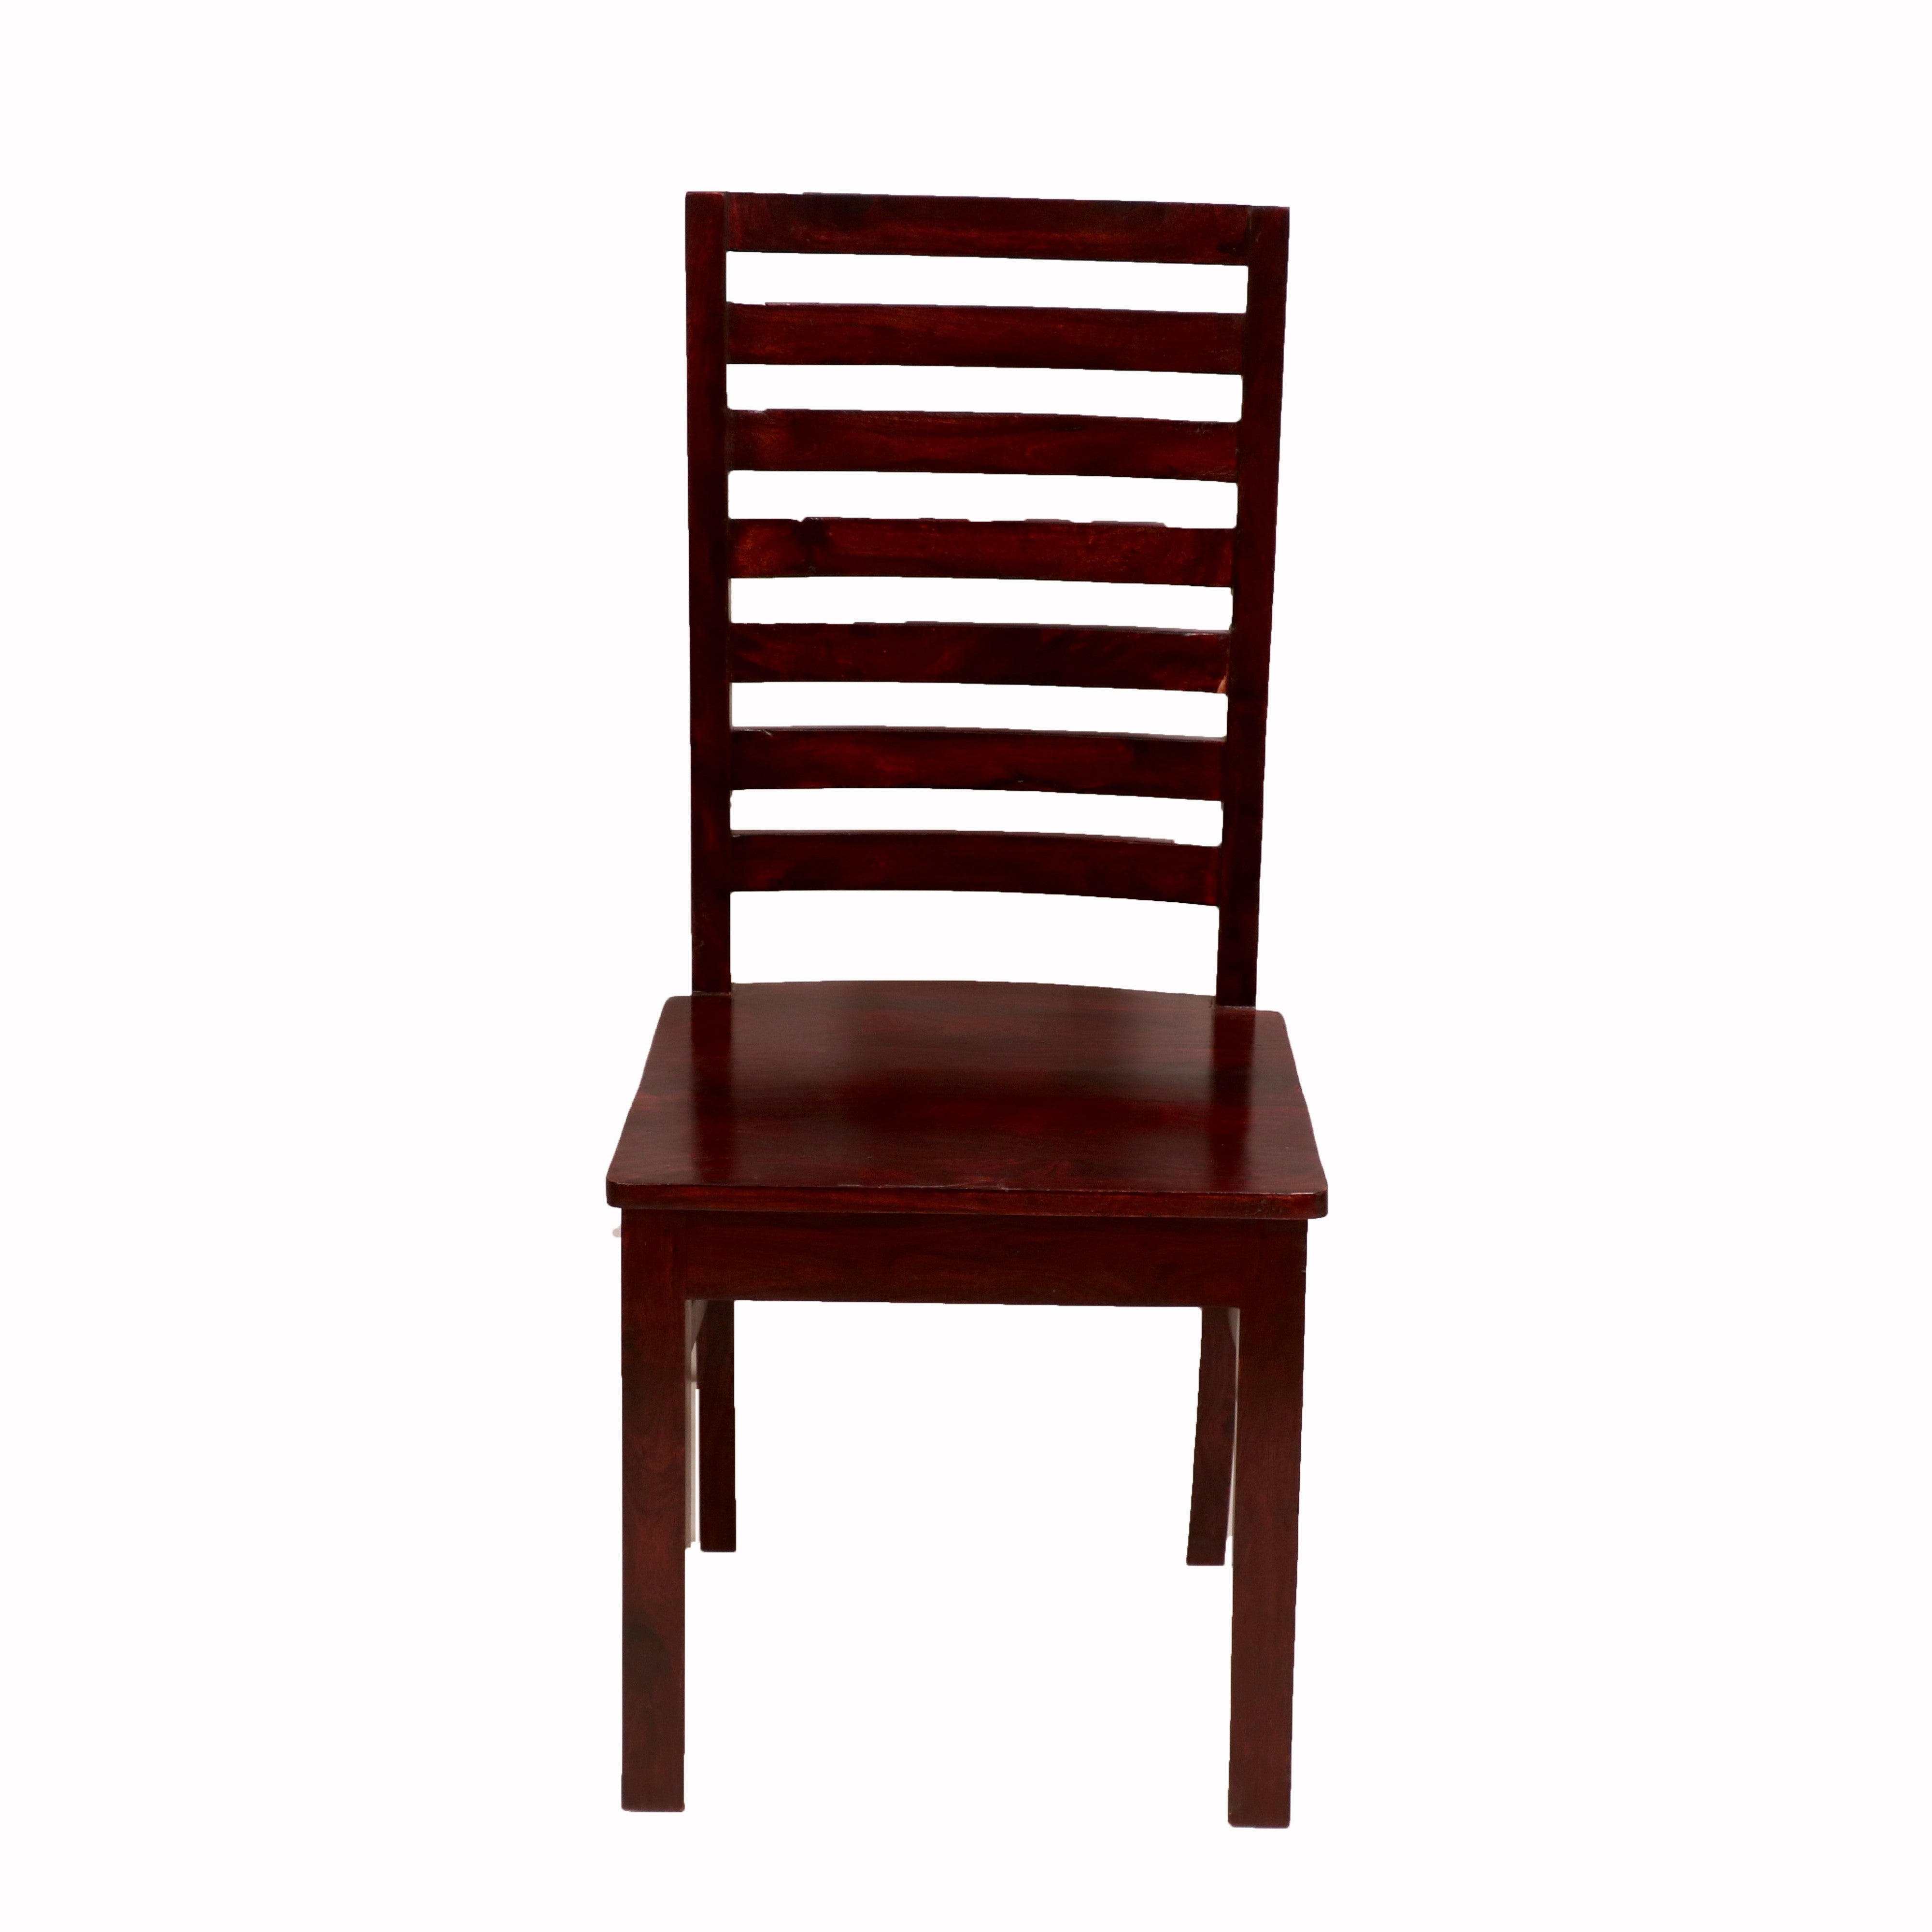 (Set of 2) Symmetrical Strip Backed Chair Dining Chair